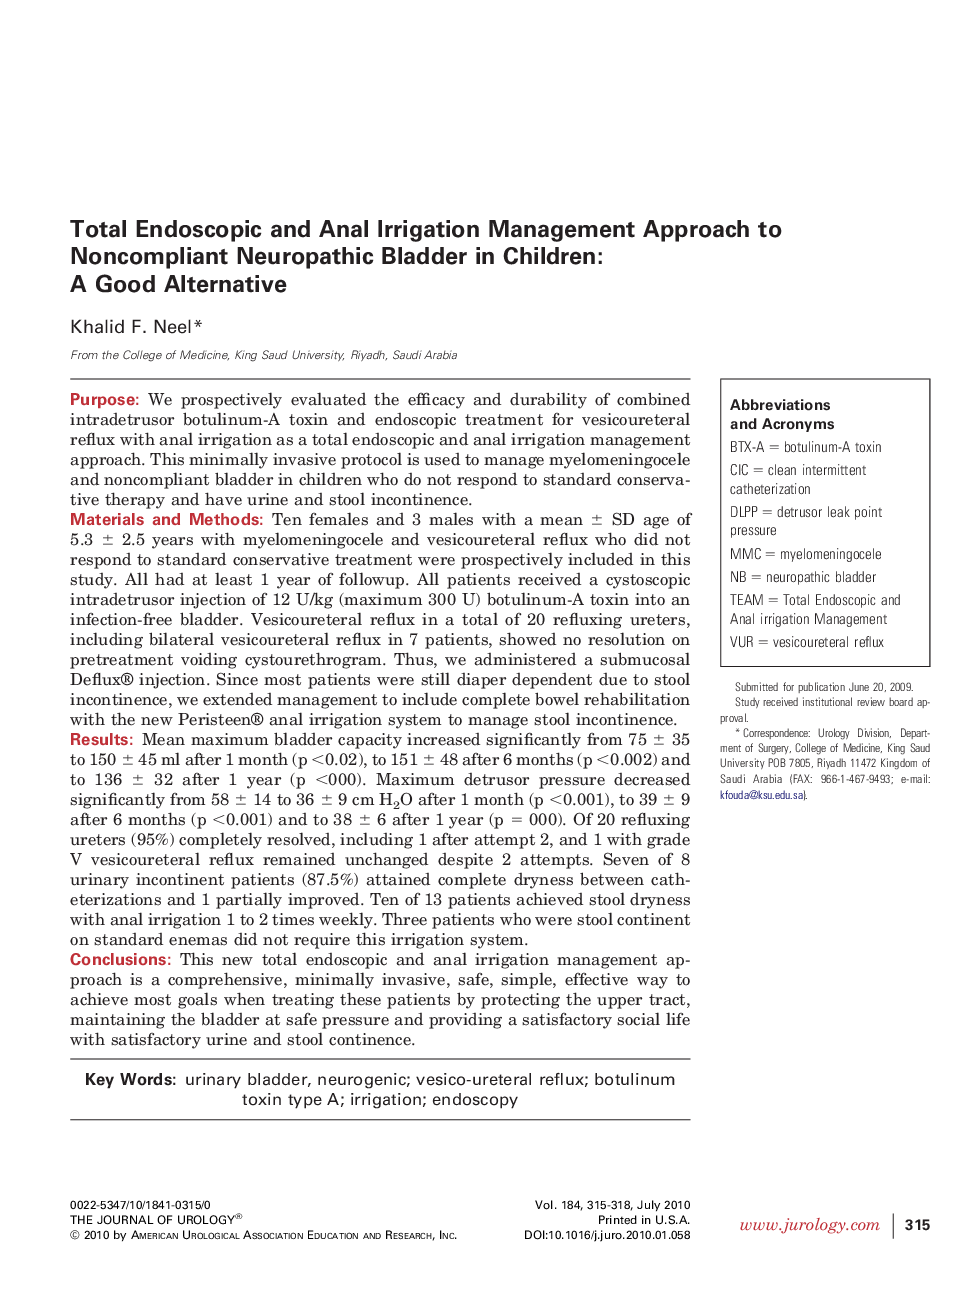 Total Endoscopic and Anal Irrigation Management Approach to Noncompliant Neuropathic Bladder in Children: A Good Alternative